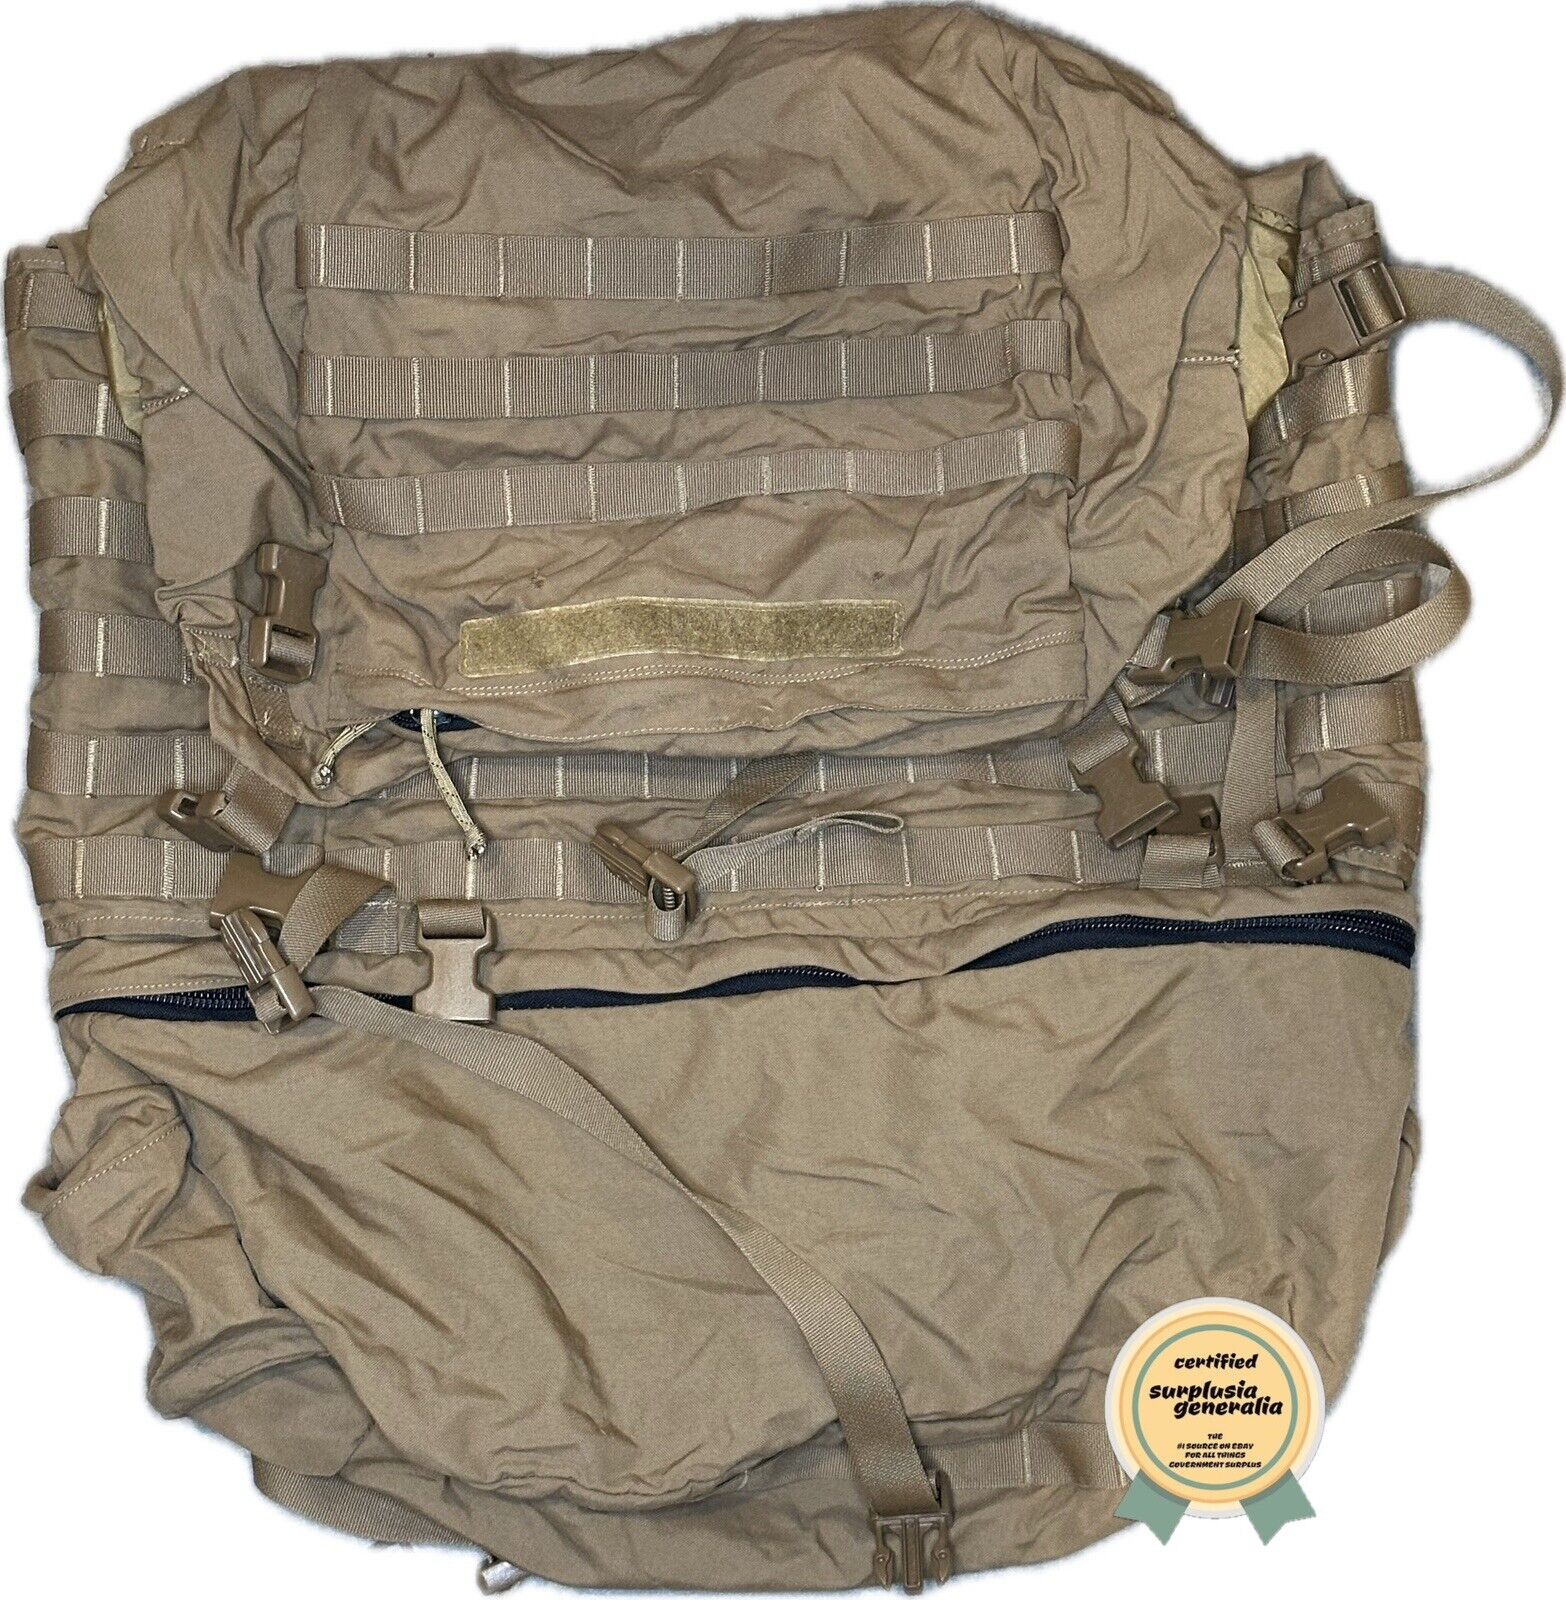 US Marine Corps Surplus FILBE System Main Pack/Rucksack Coyote - Bag Only